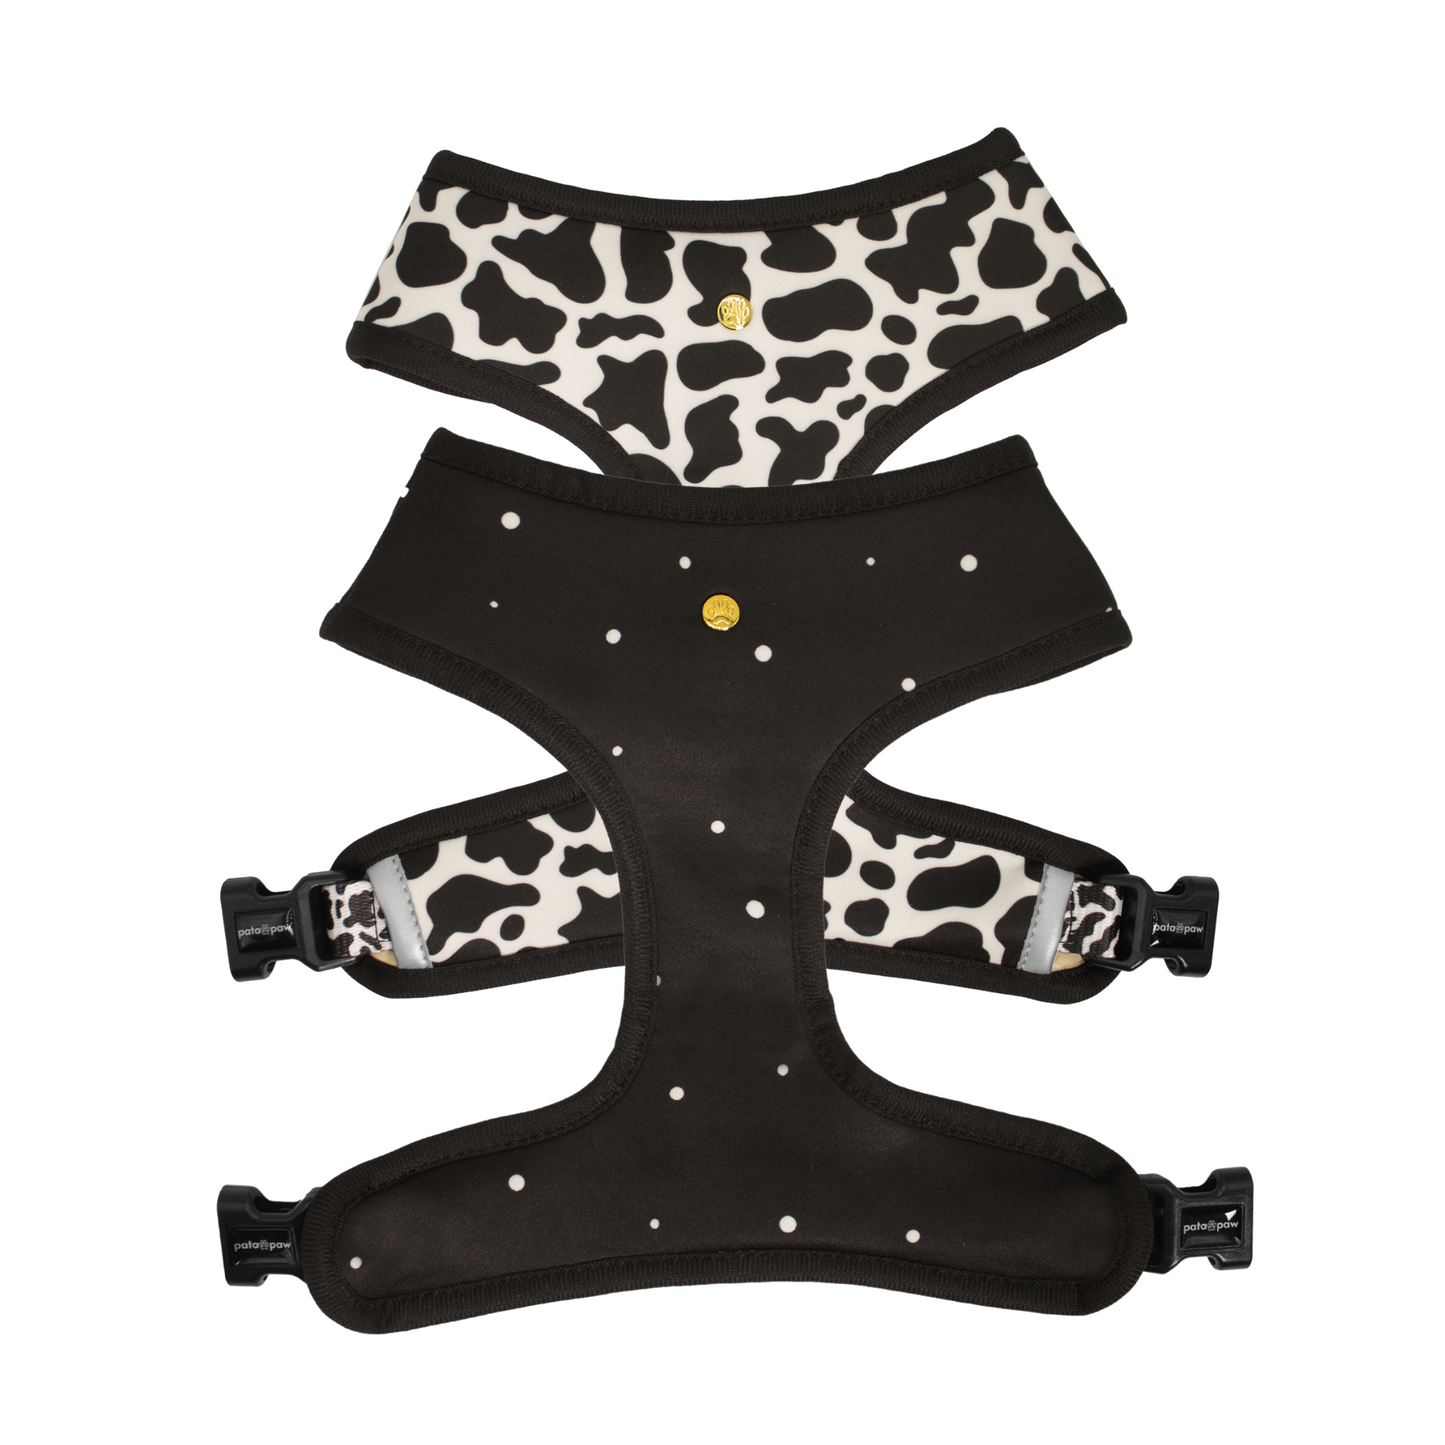 Pata Paw moo reversible harness showing both sides.